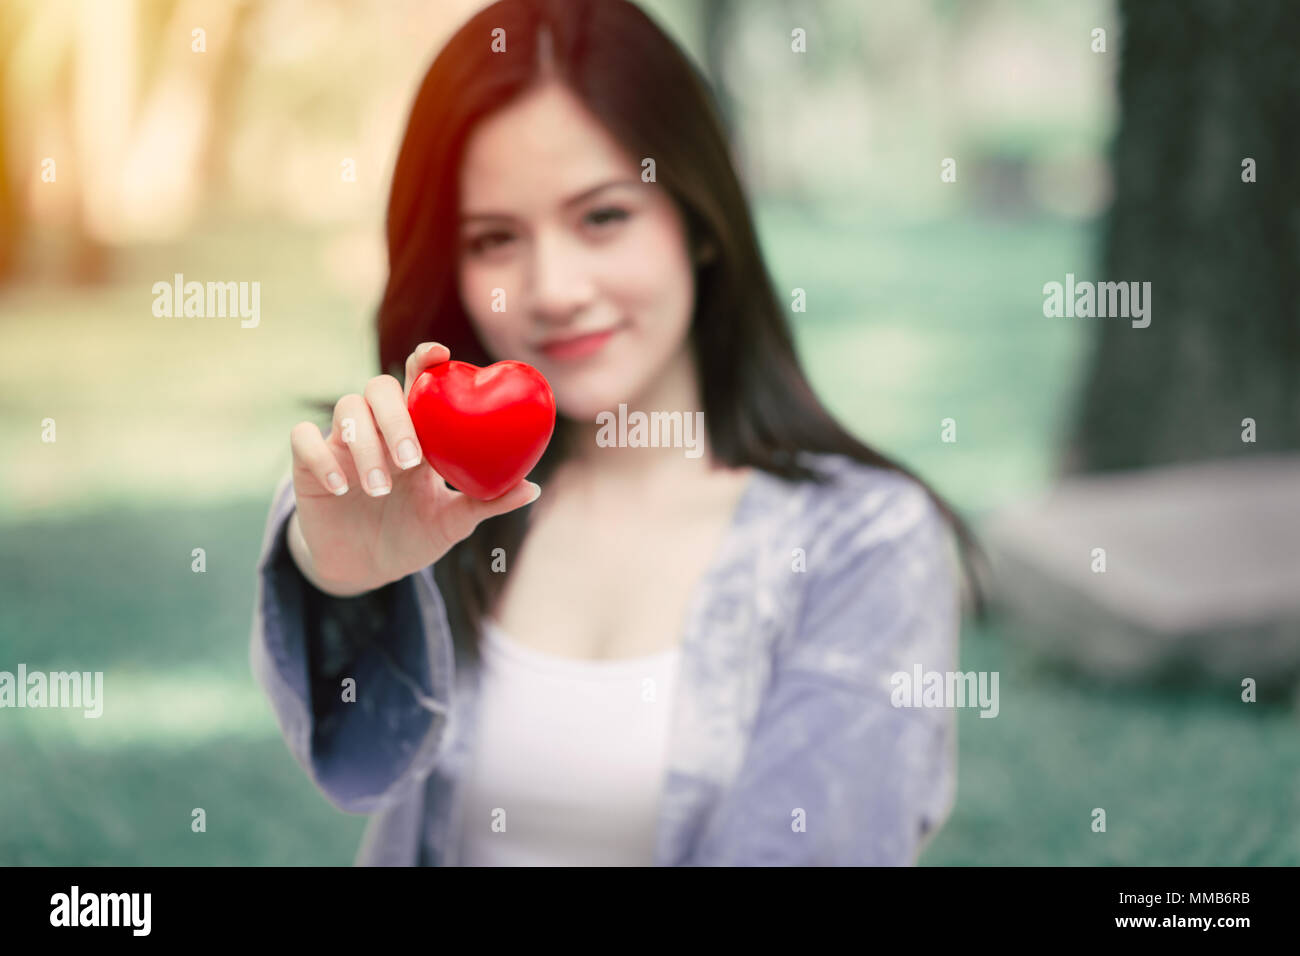 Giving Love together concept: Cute Asian woman hold red heart for loving sharing lovely vintage color tone Stock Photo